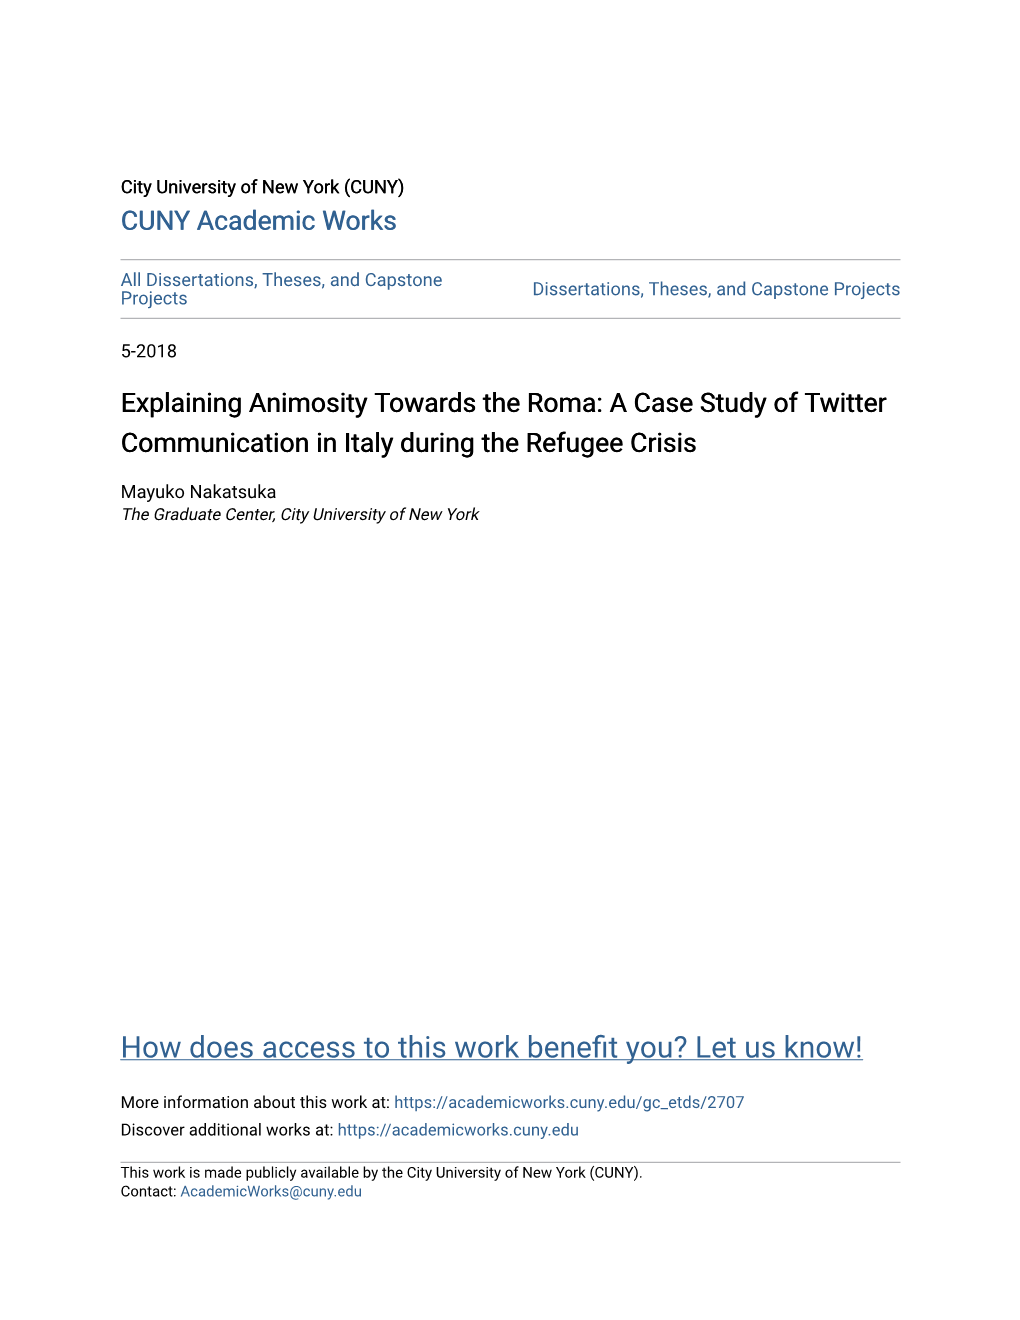 Explaining Animosity Towards the Roma: a Case Study of Twitter Communication in Italy During the Refugee Crisis